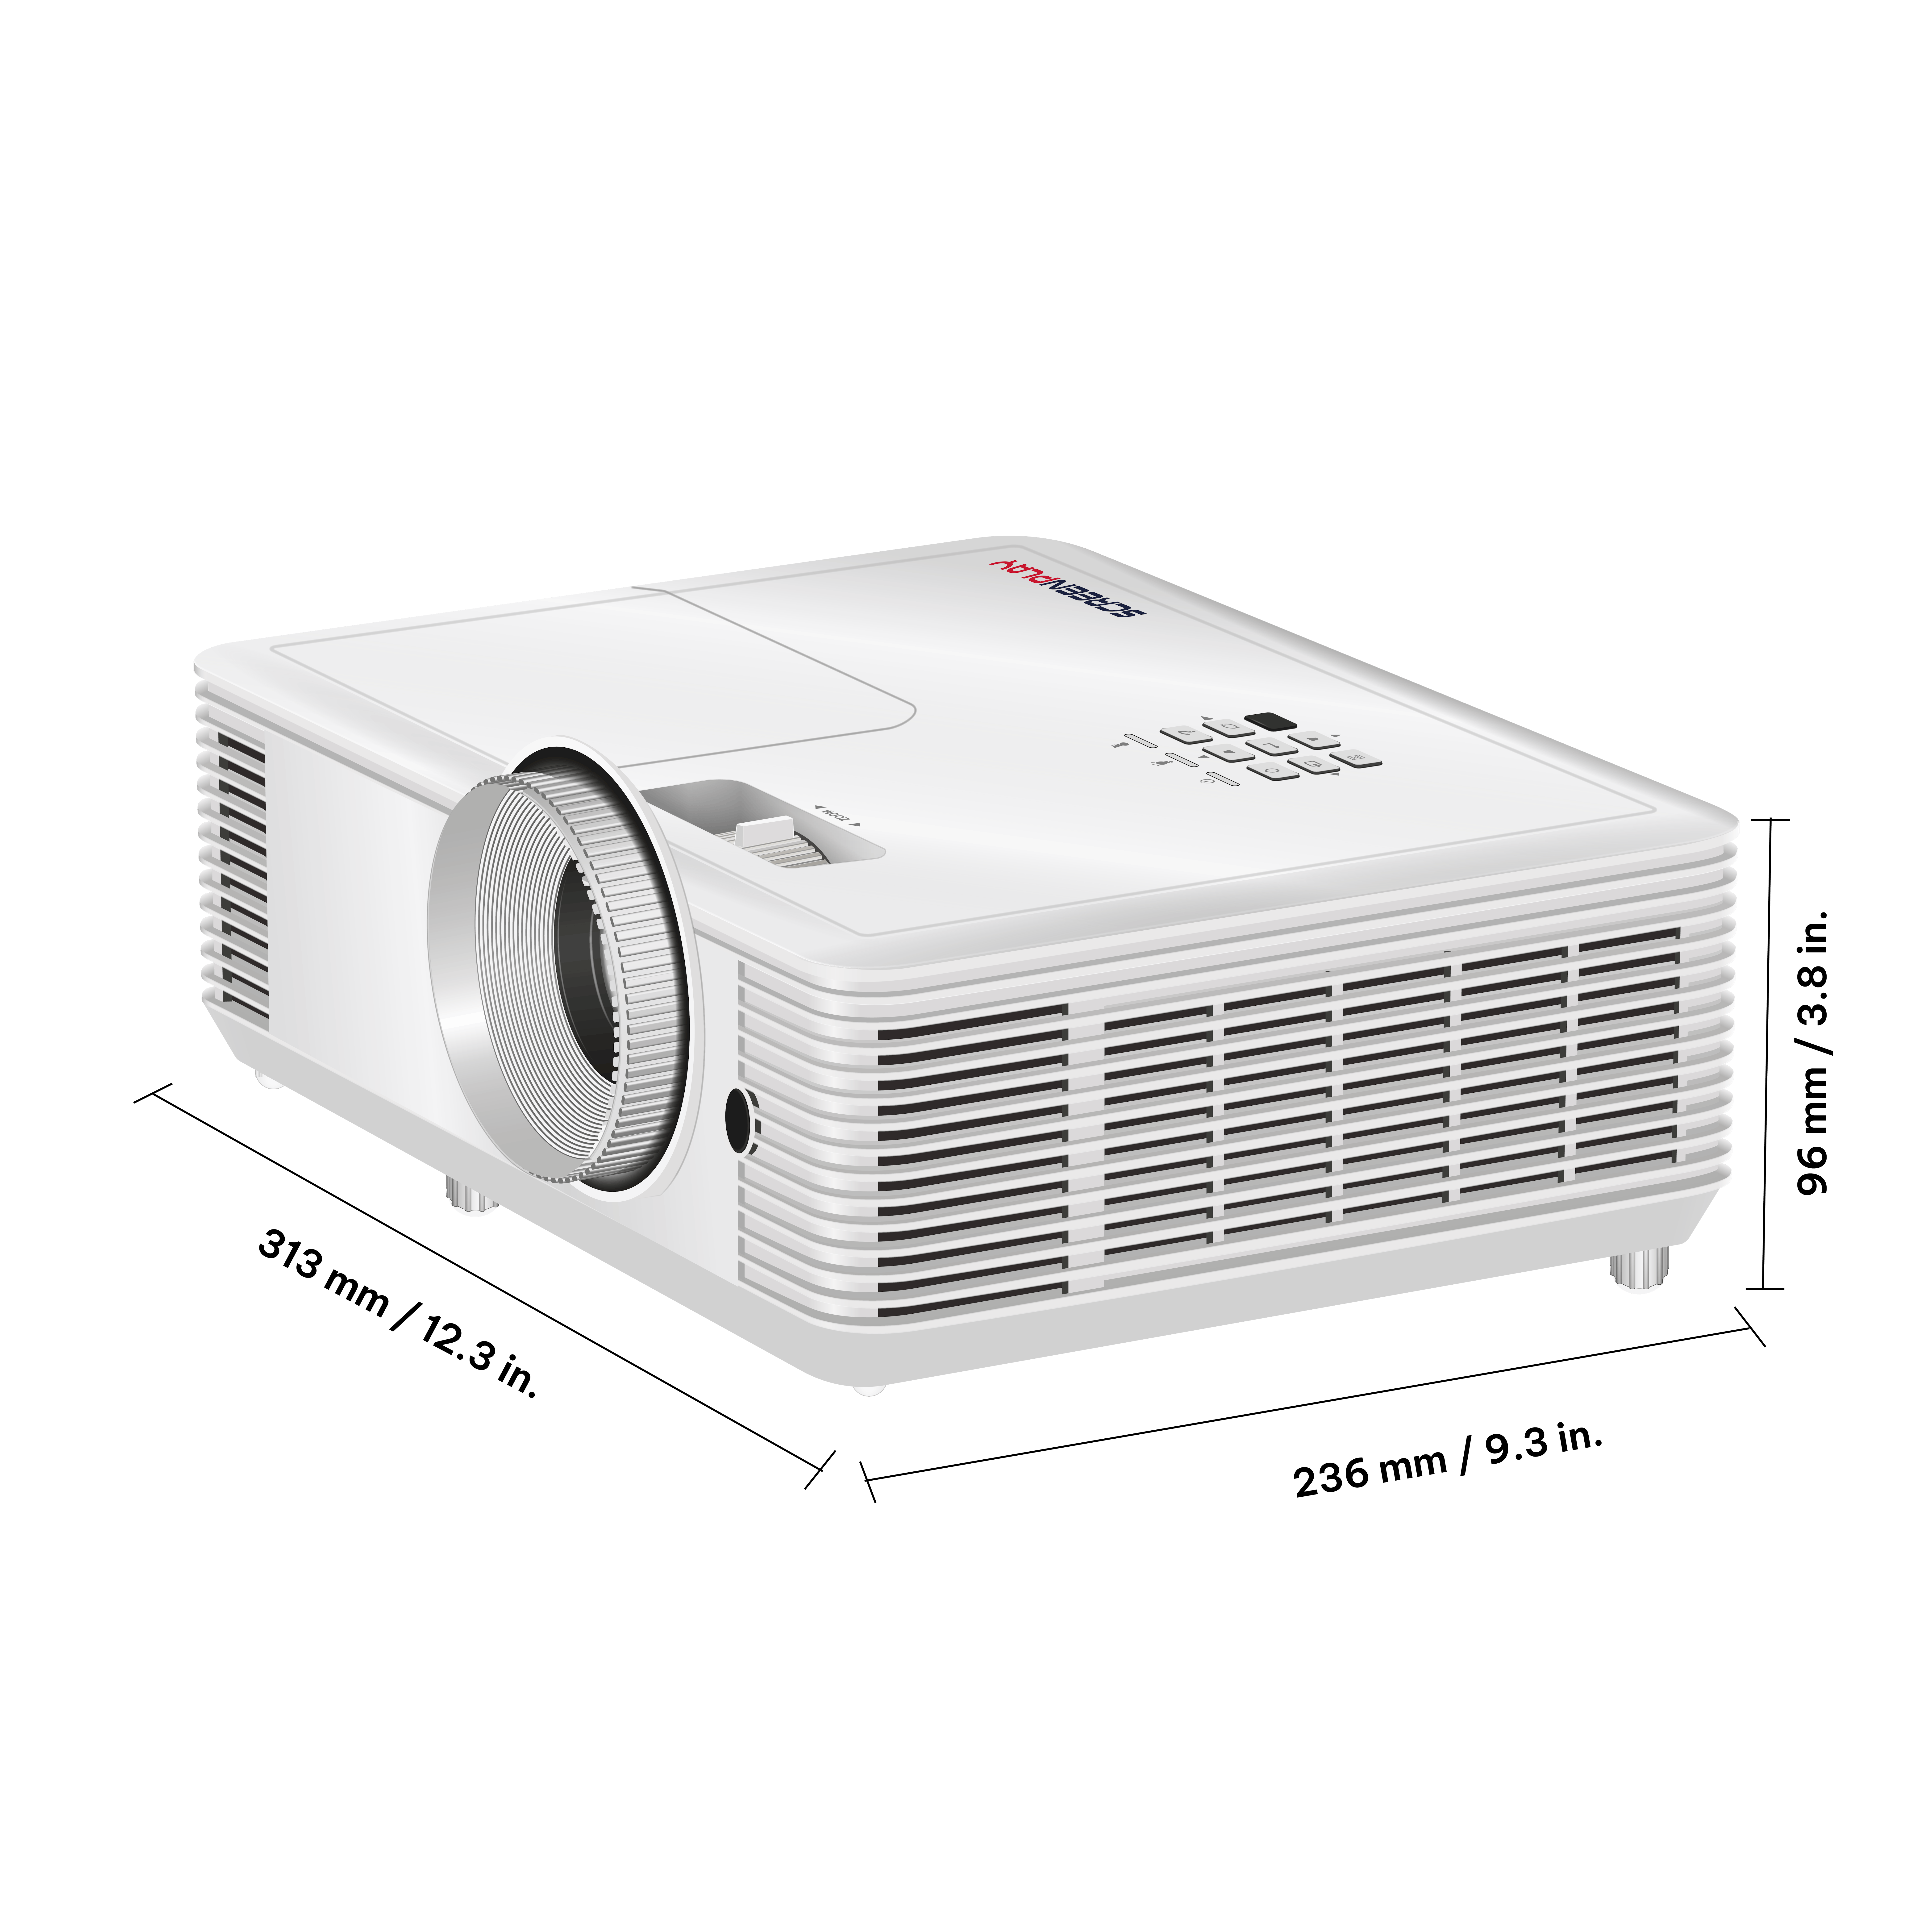 ggmjCnBy-ScreenPlay-projector-SP2234-wdimentions-3000px3000.png